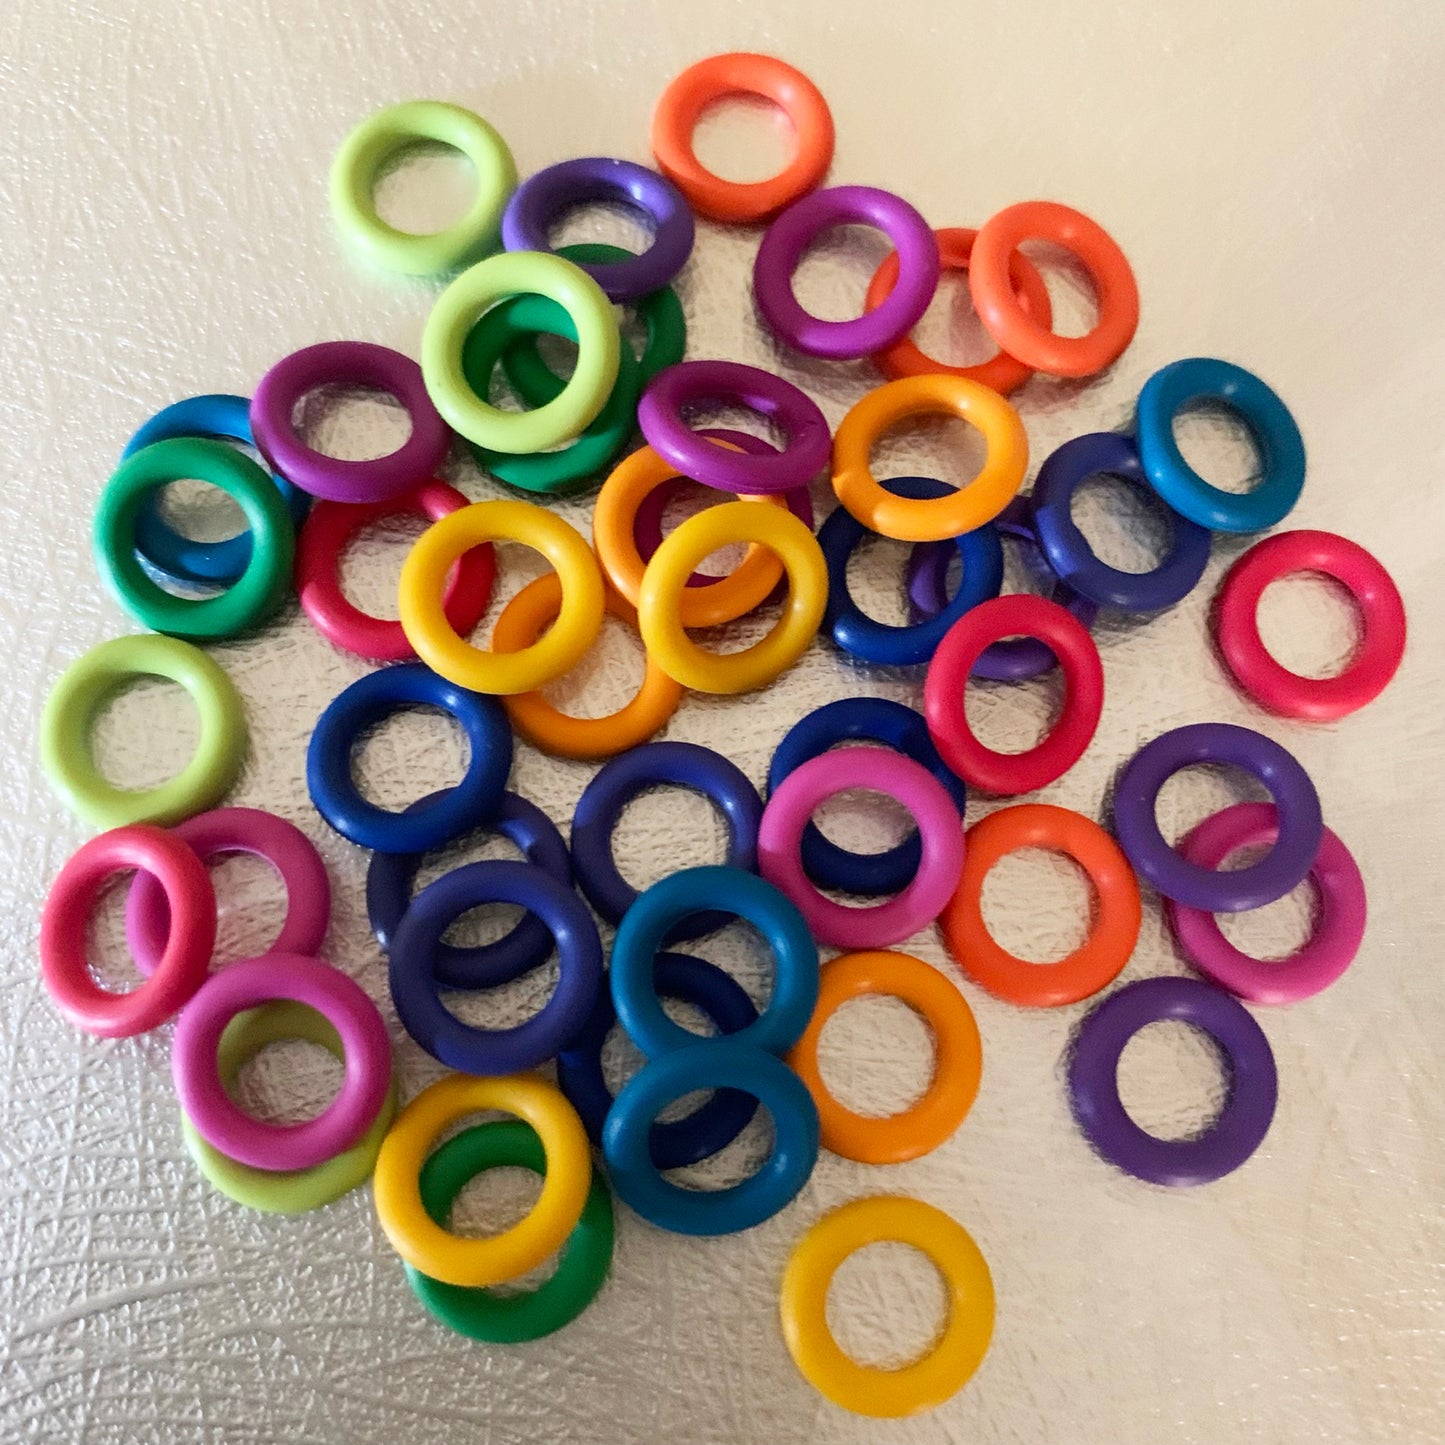 10mm EPDM Rubber O-Rings (ID: 6mm) - Hand Picked 12 Color Rainbow (4 of each color)